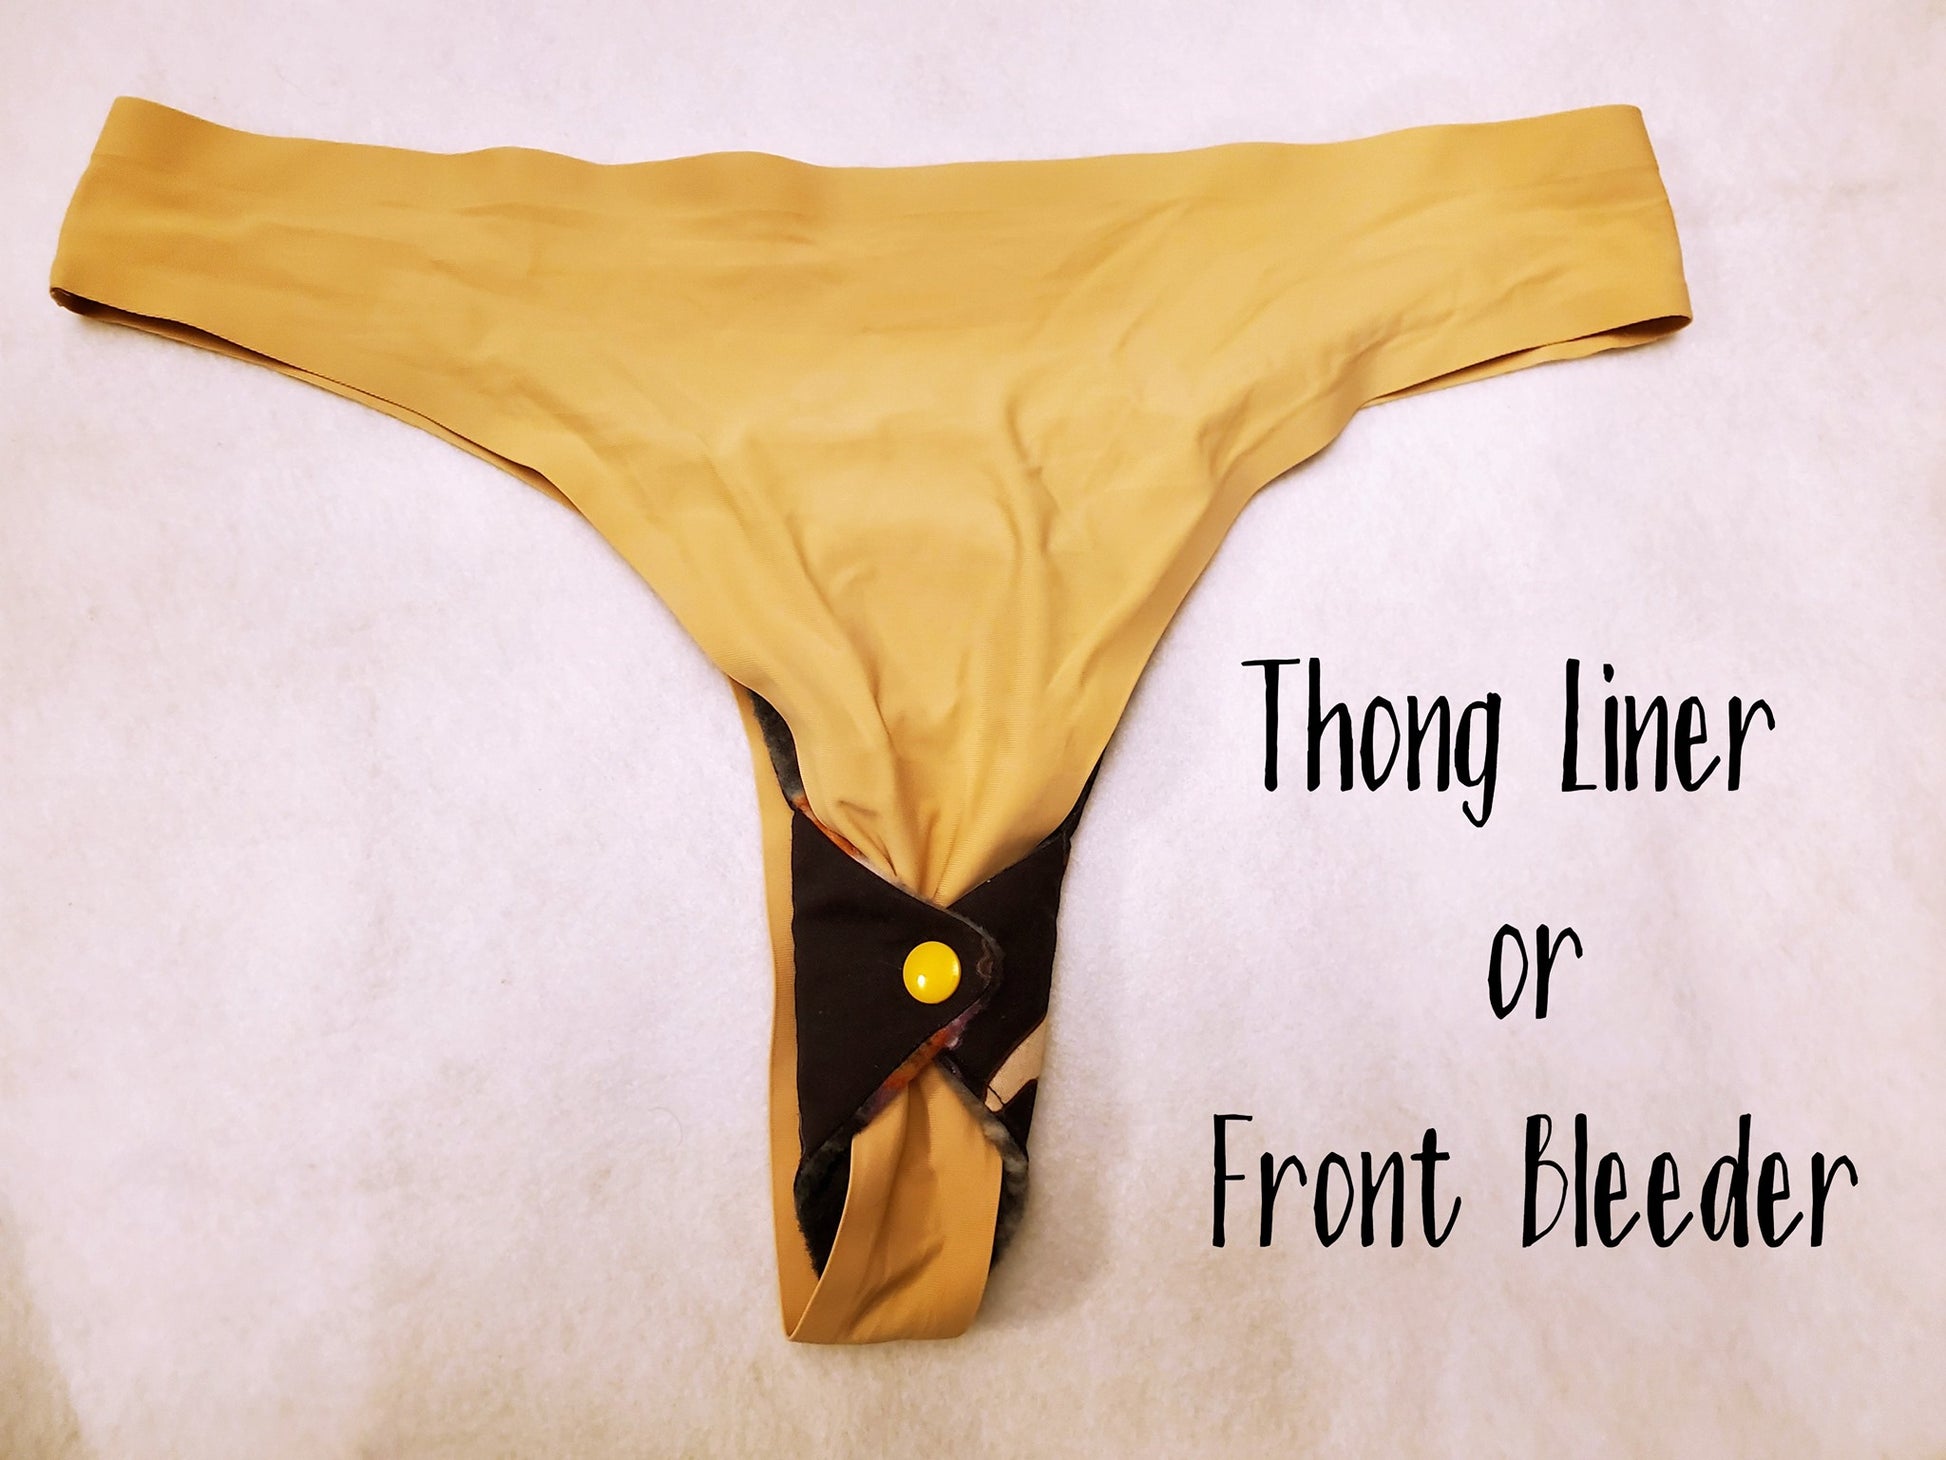 Custom Thong Panty Liners, 7 sizes to choose